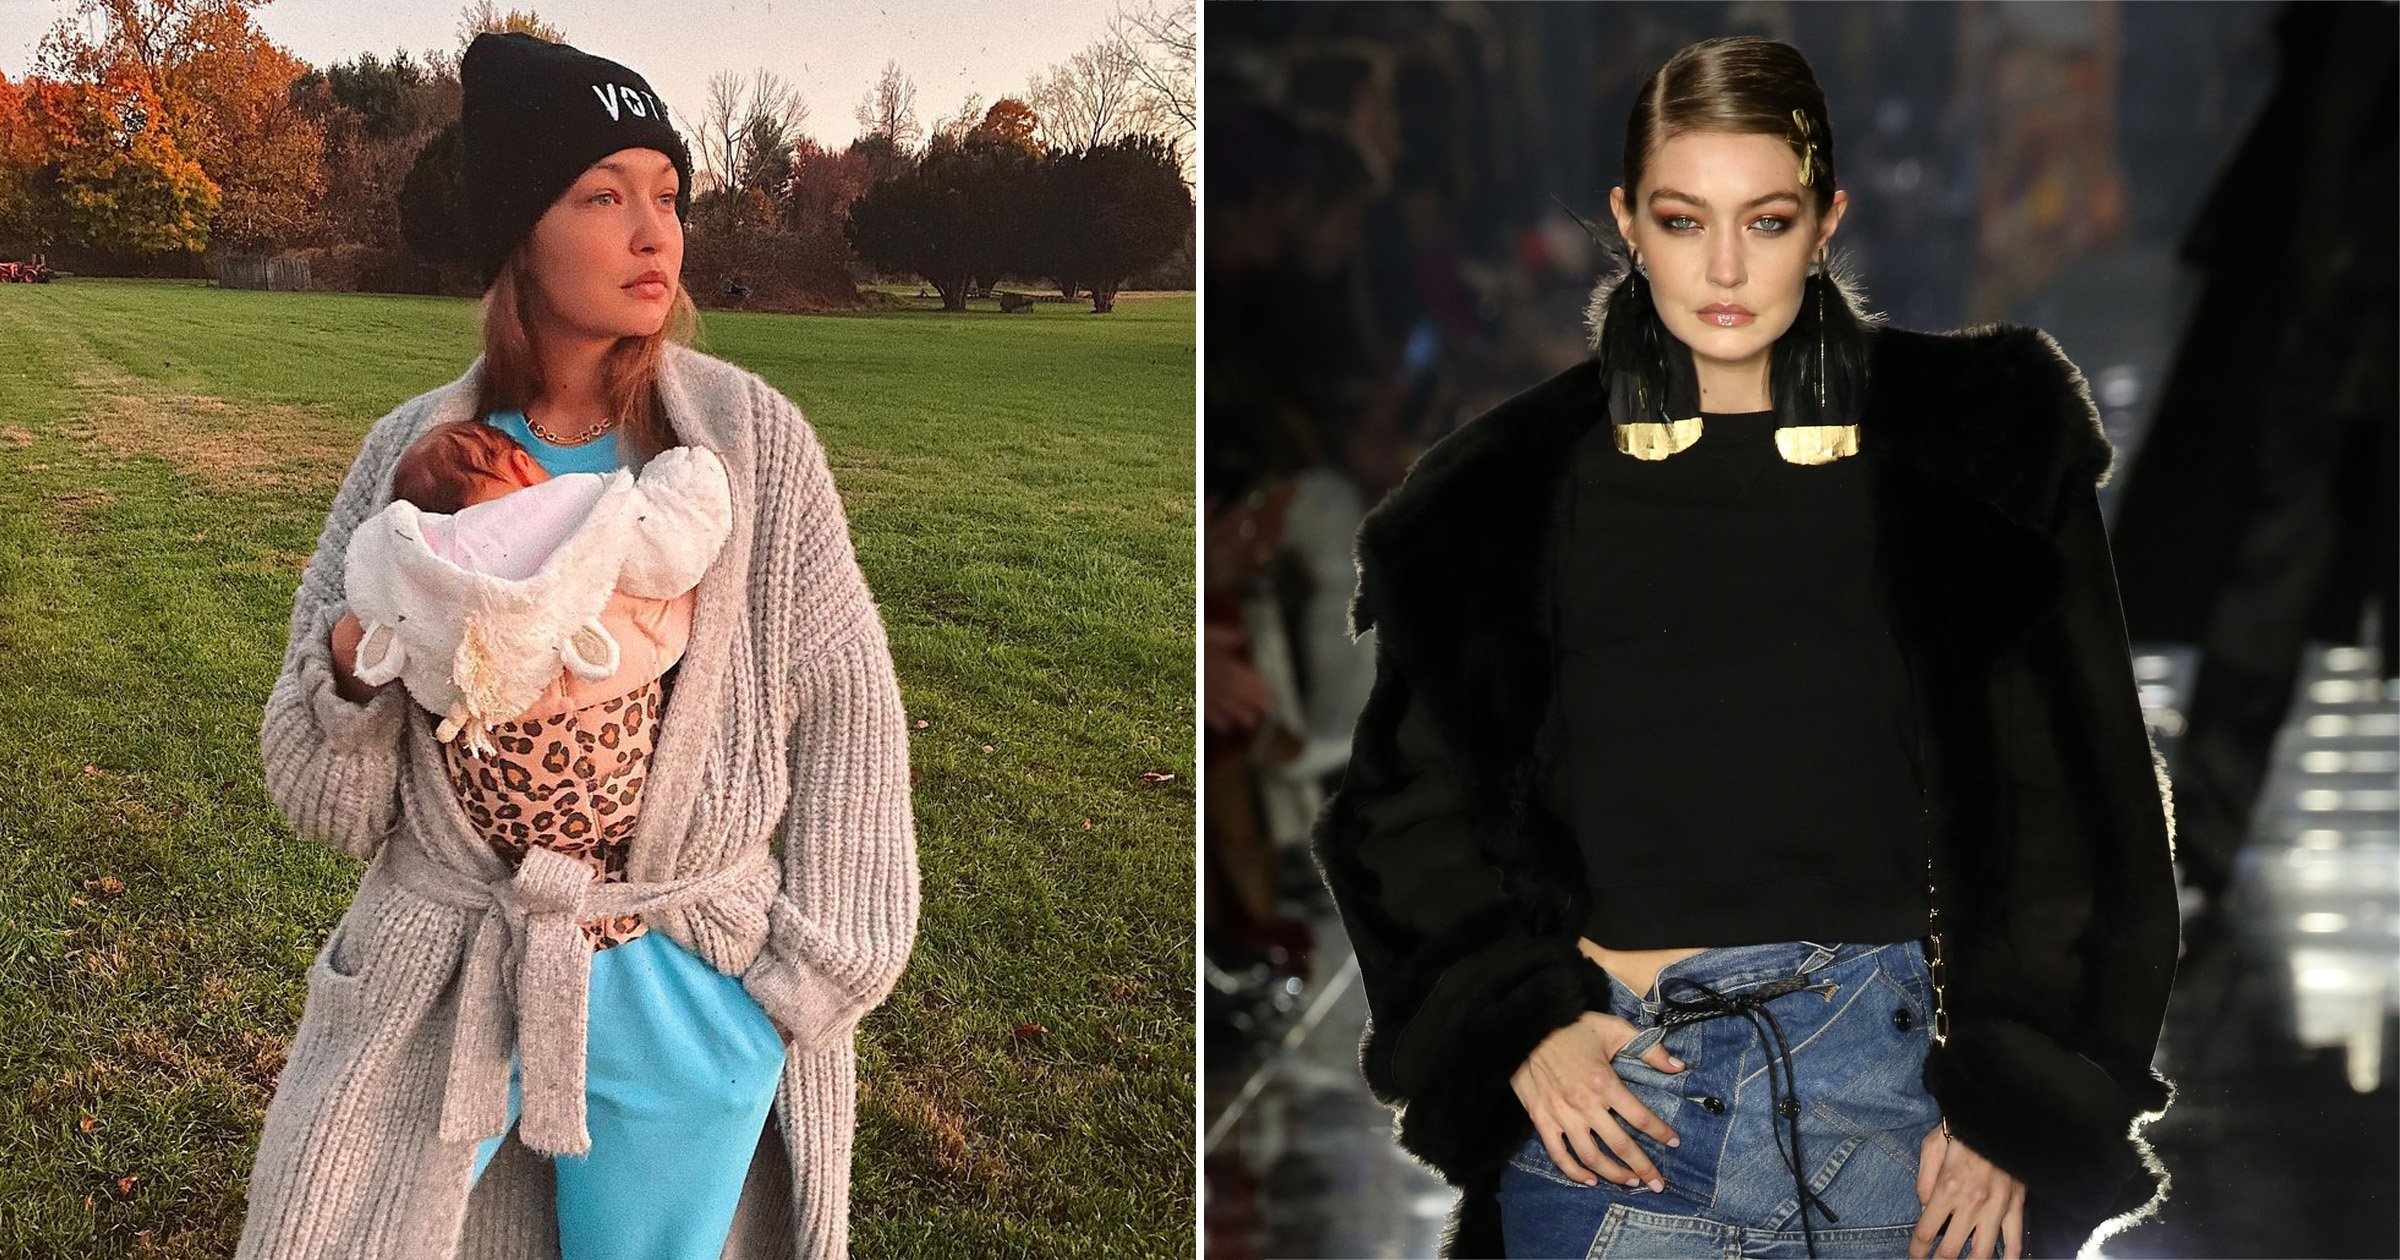 Gigi Hadid reveals she found out she was pregnant at New York Fashion Week: ‘I was so nauseous’